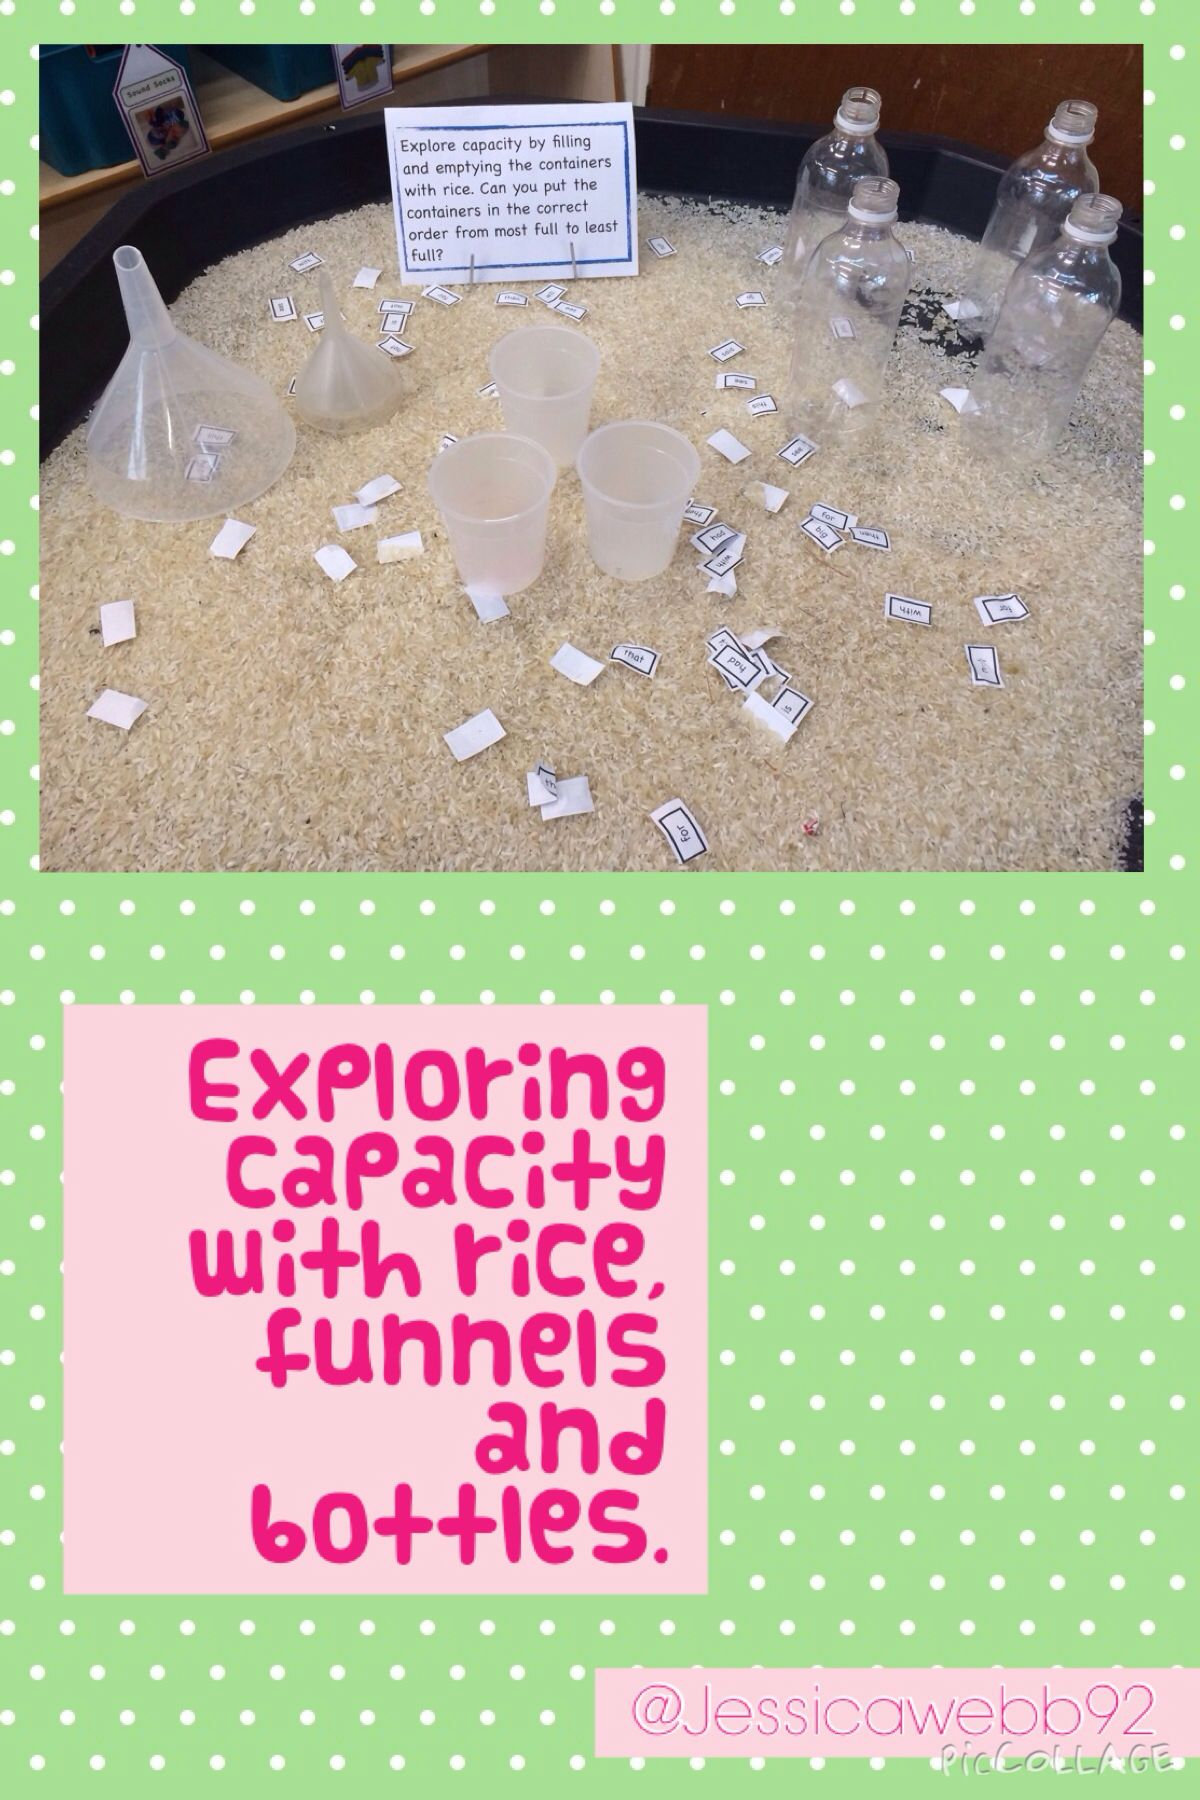 Exploring Capacity With Rice, Bottles And Funnels. Such A